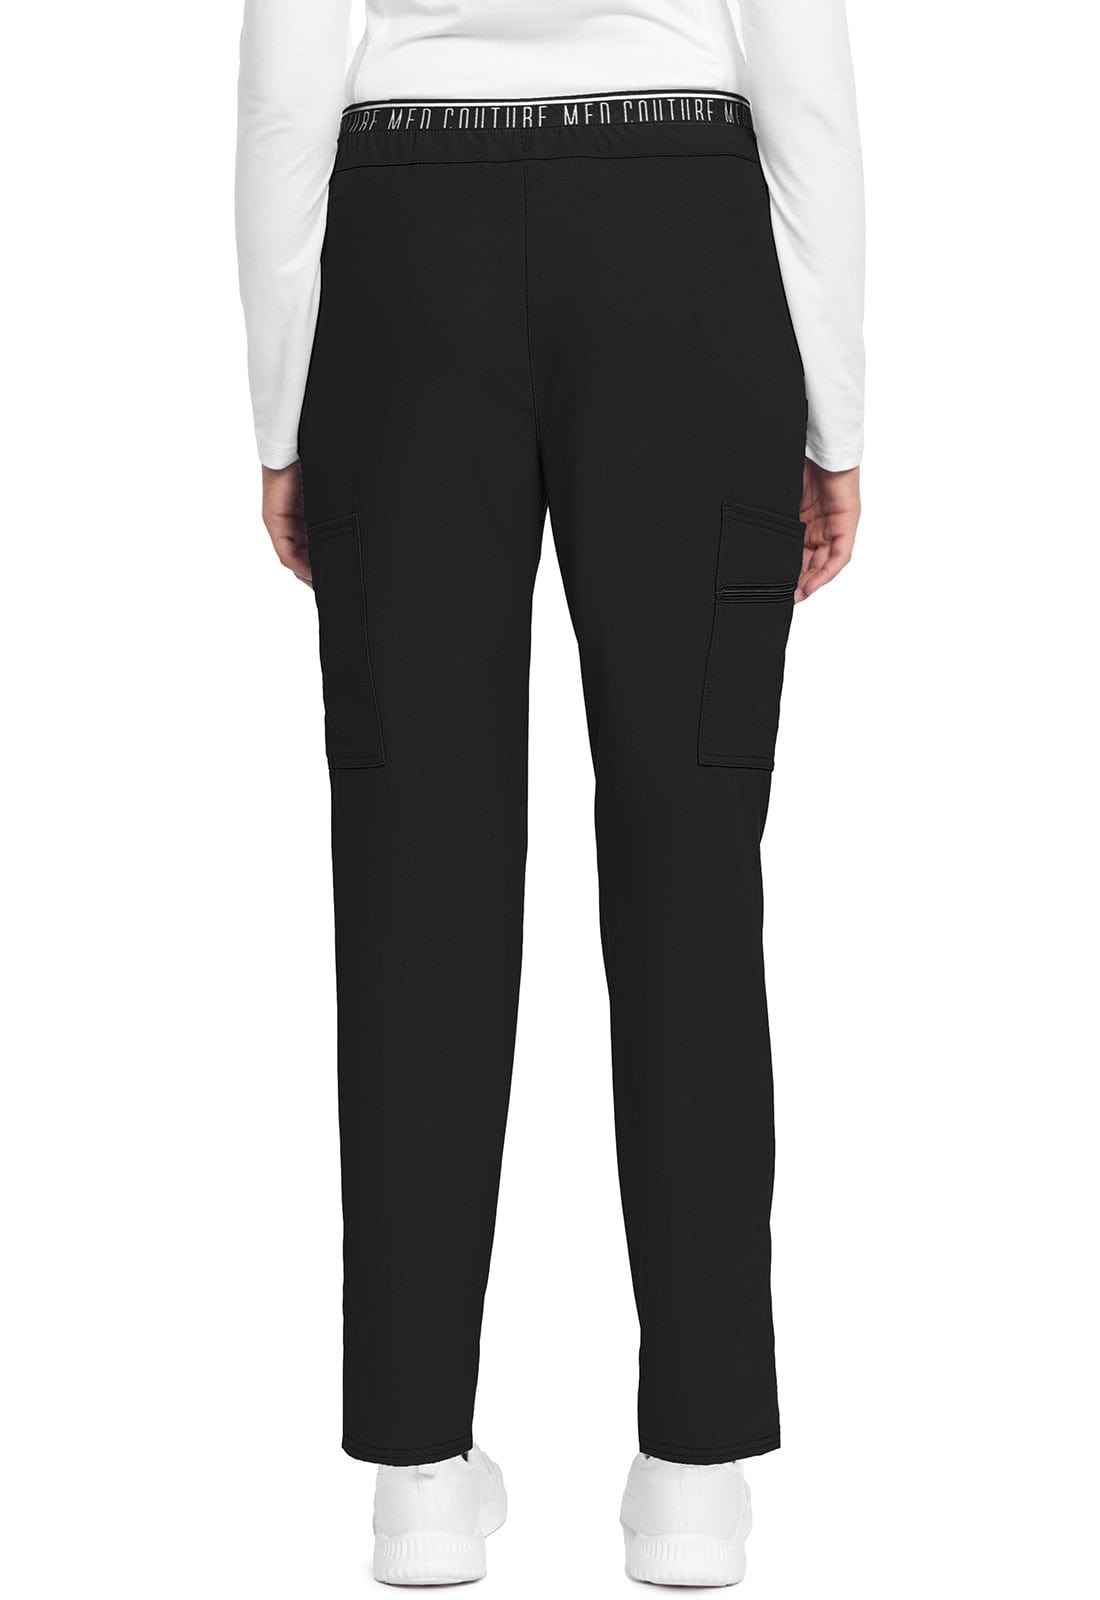 Med Couture MC Insight MC Insight Tall Mid-rise Tapered Leg Pull-on Scrub Pant MC009T